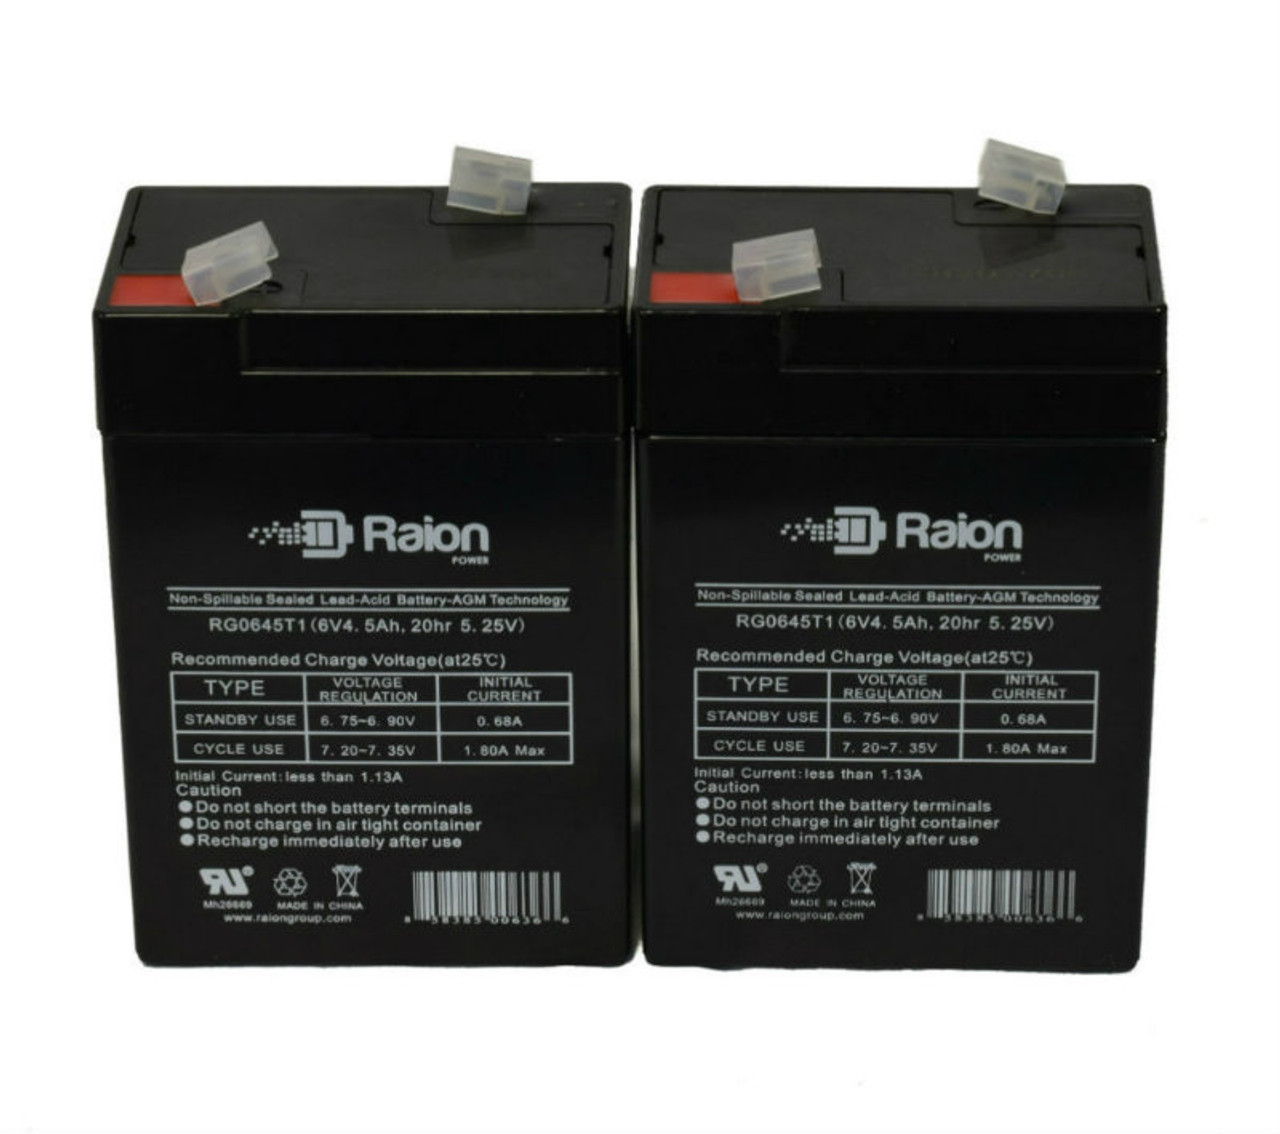 Raion Power 6 Volt 4.5Ah RG0645T1 Replacement Battery for Starlight 3FM6 - 2 Pack